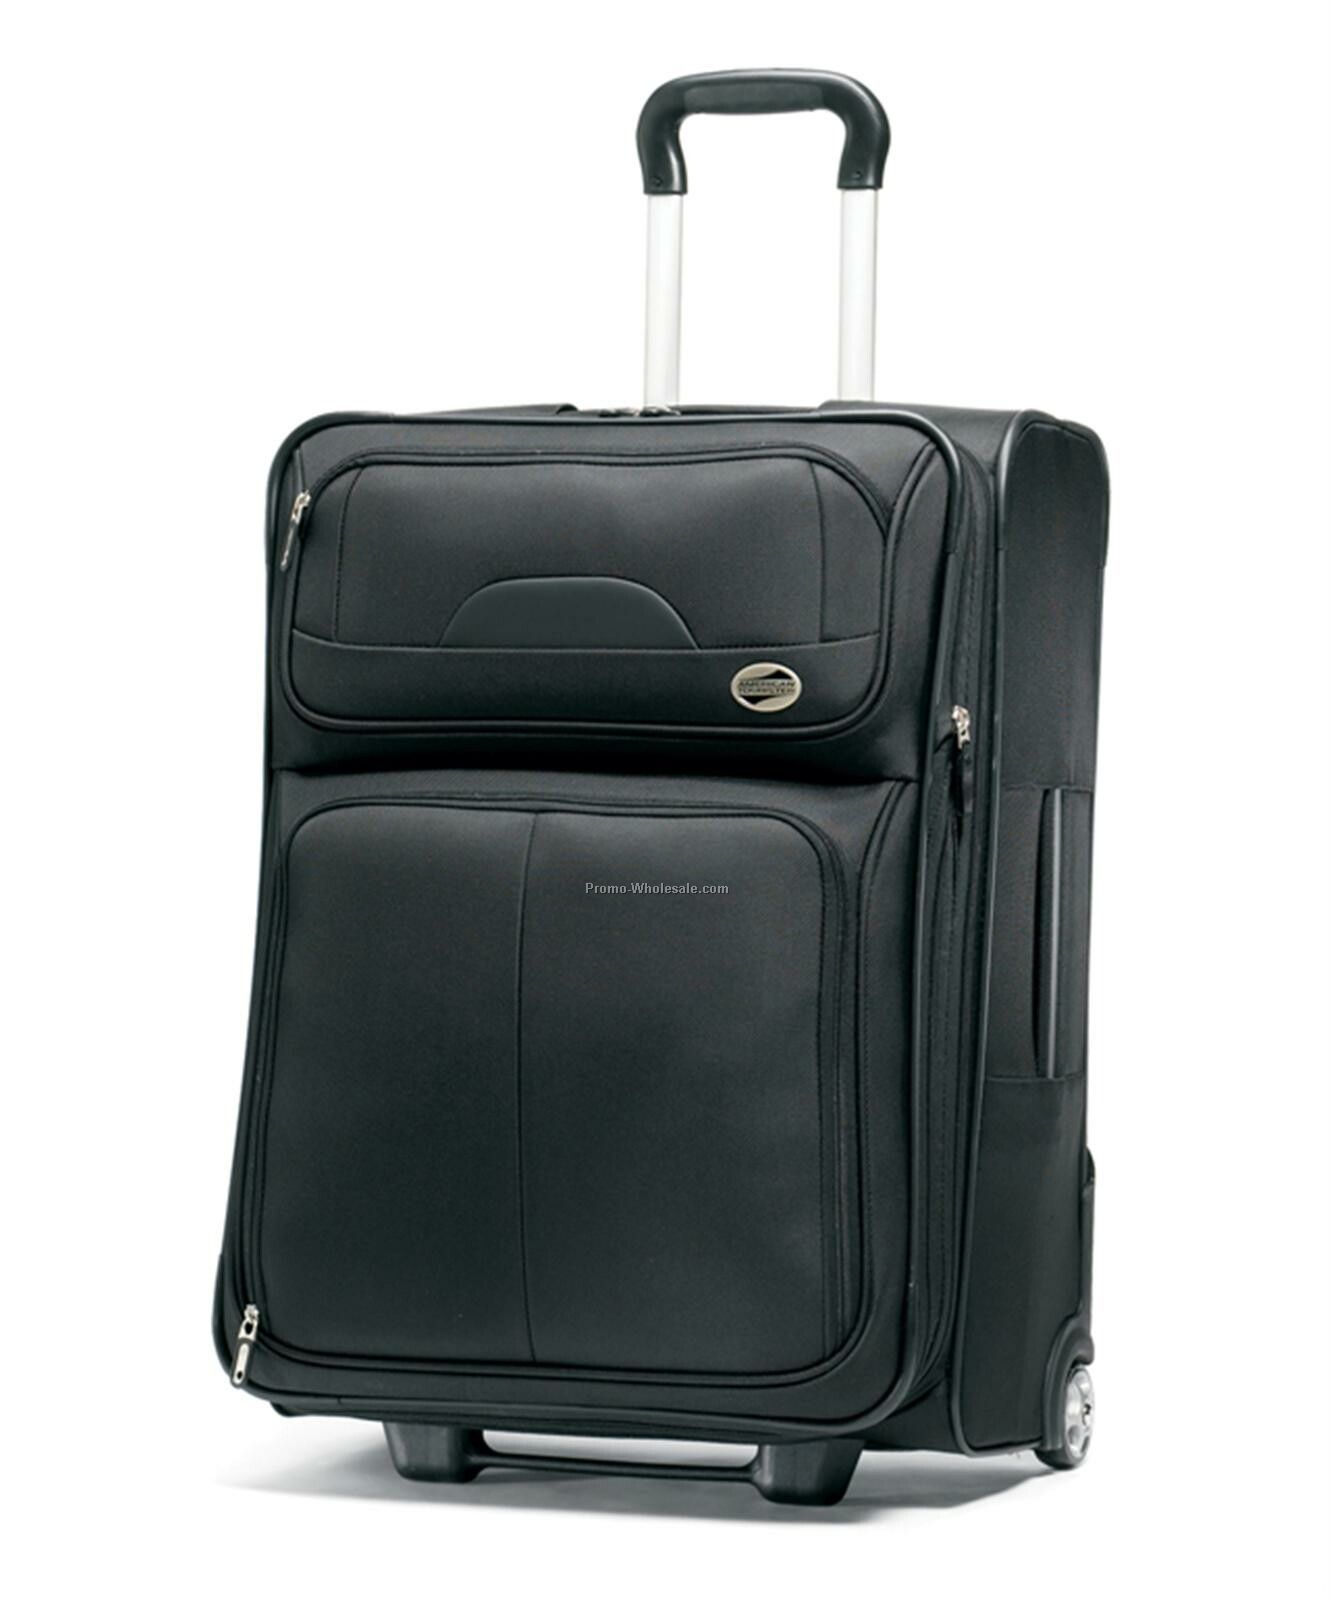 American Tourister Tribute 29" Upright Luggage